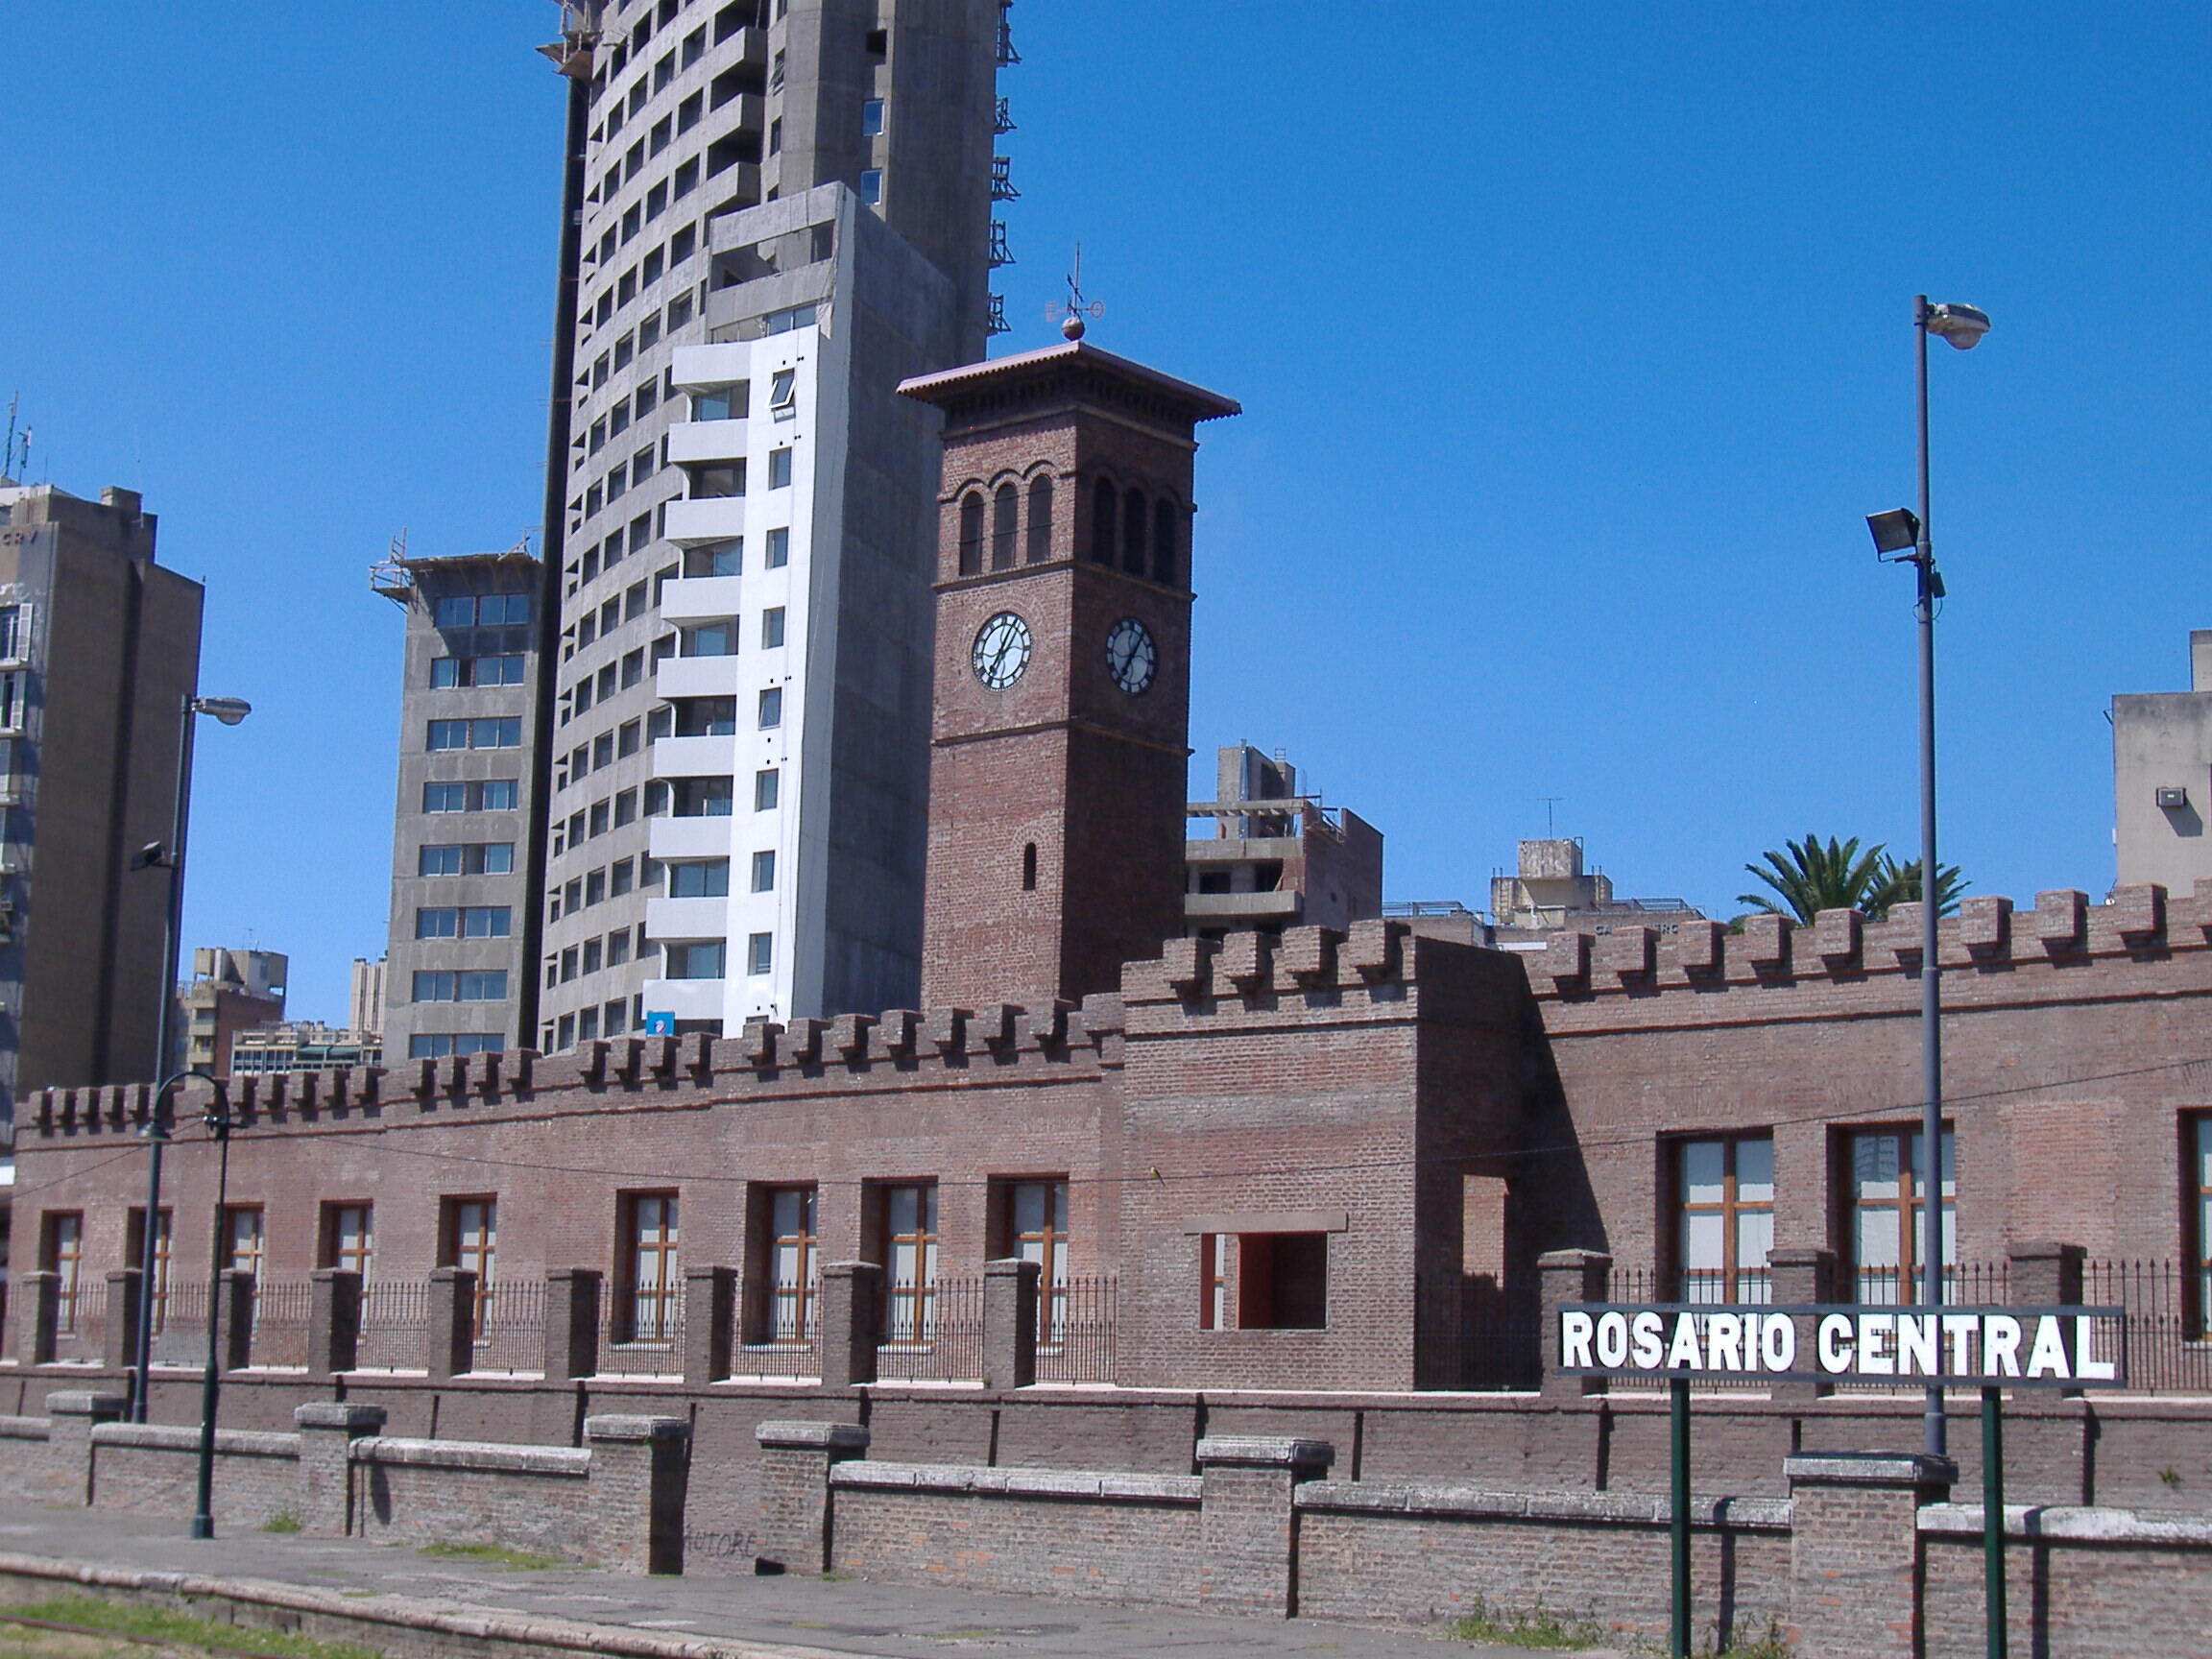 The clock tower of the former Rosario Central railway station in Rosario, Argentina, built in 1870, view from the platforms. The main building has…